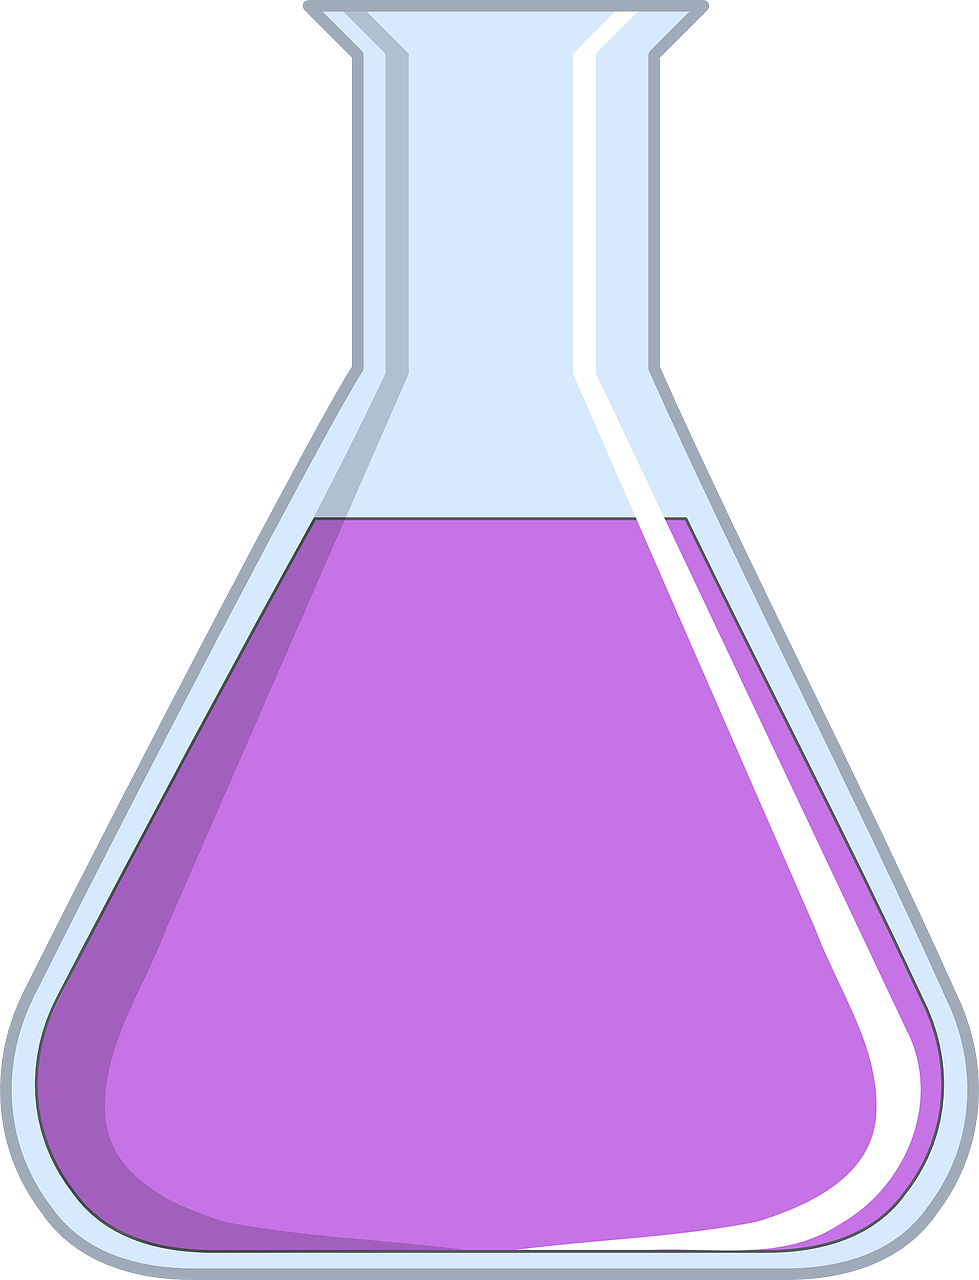 Science PNG Image File